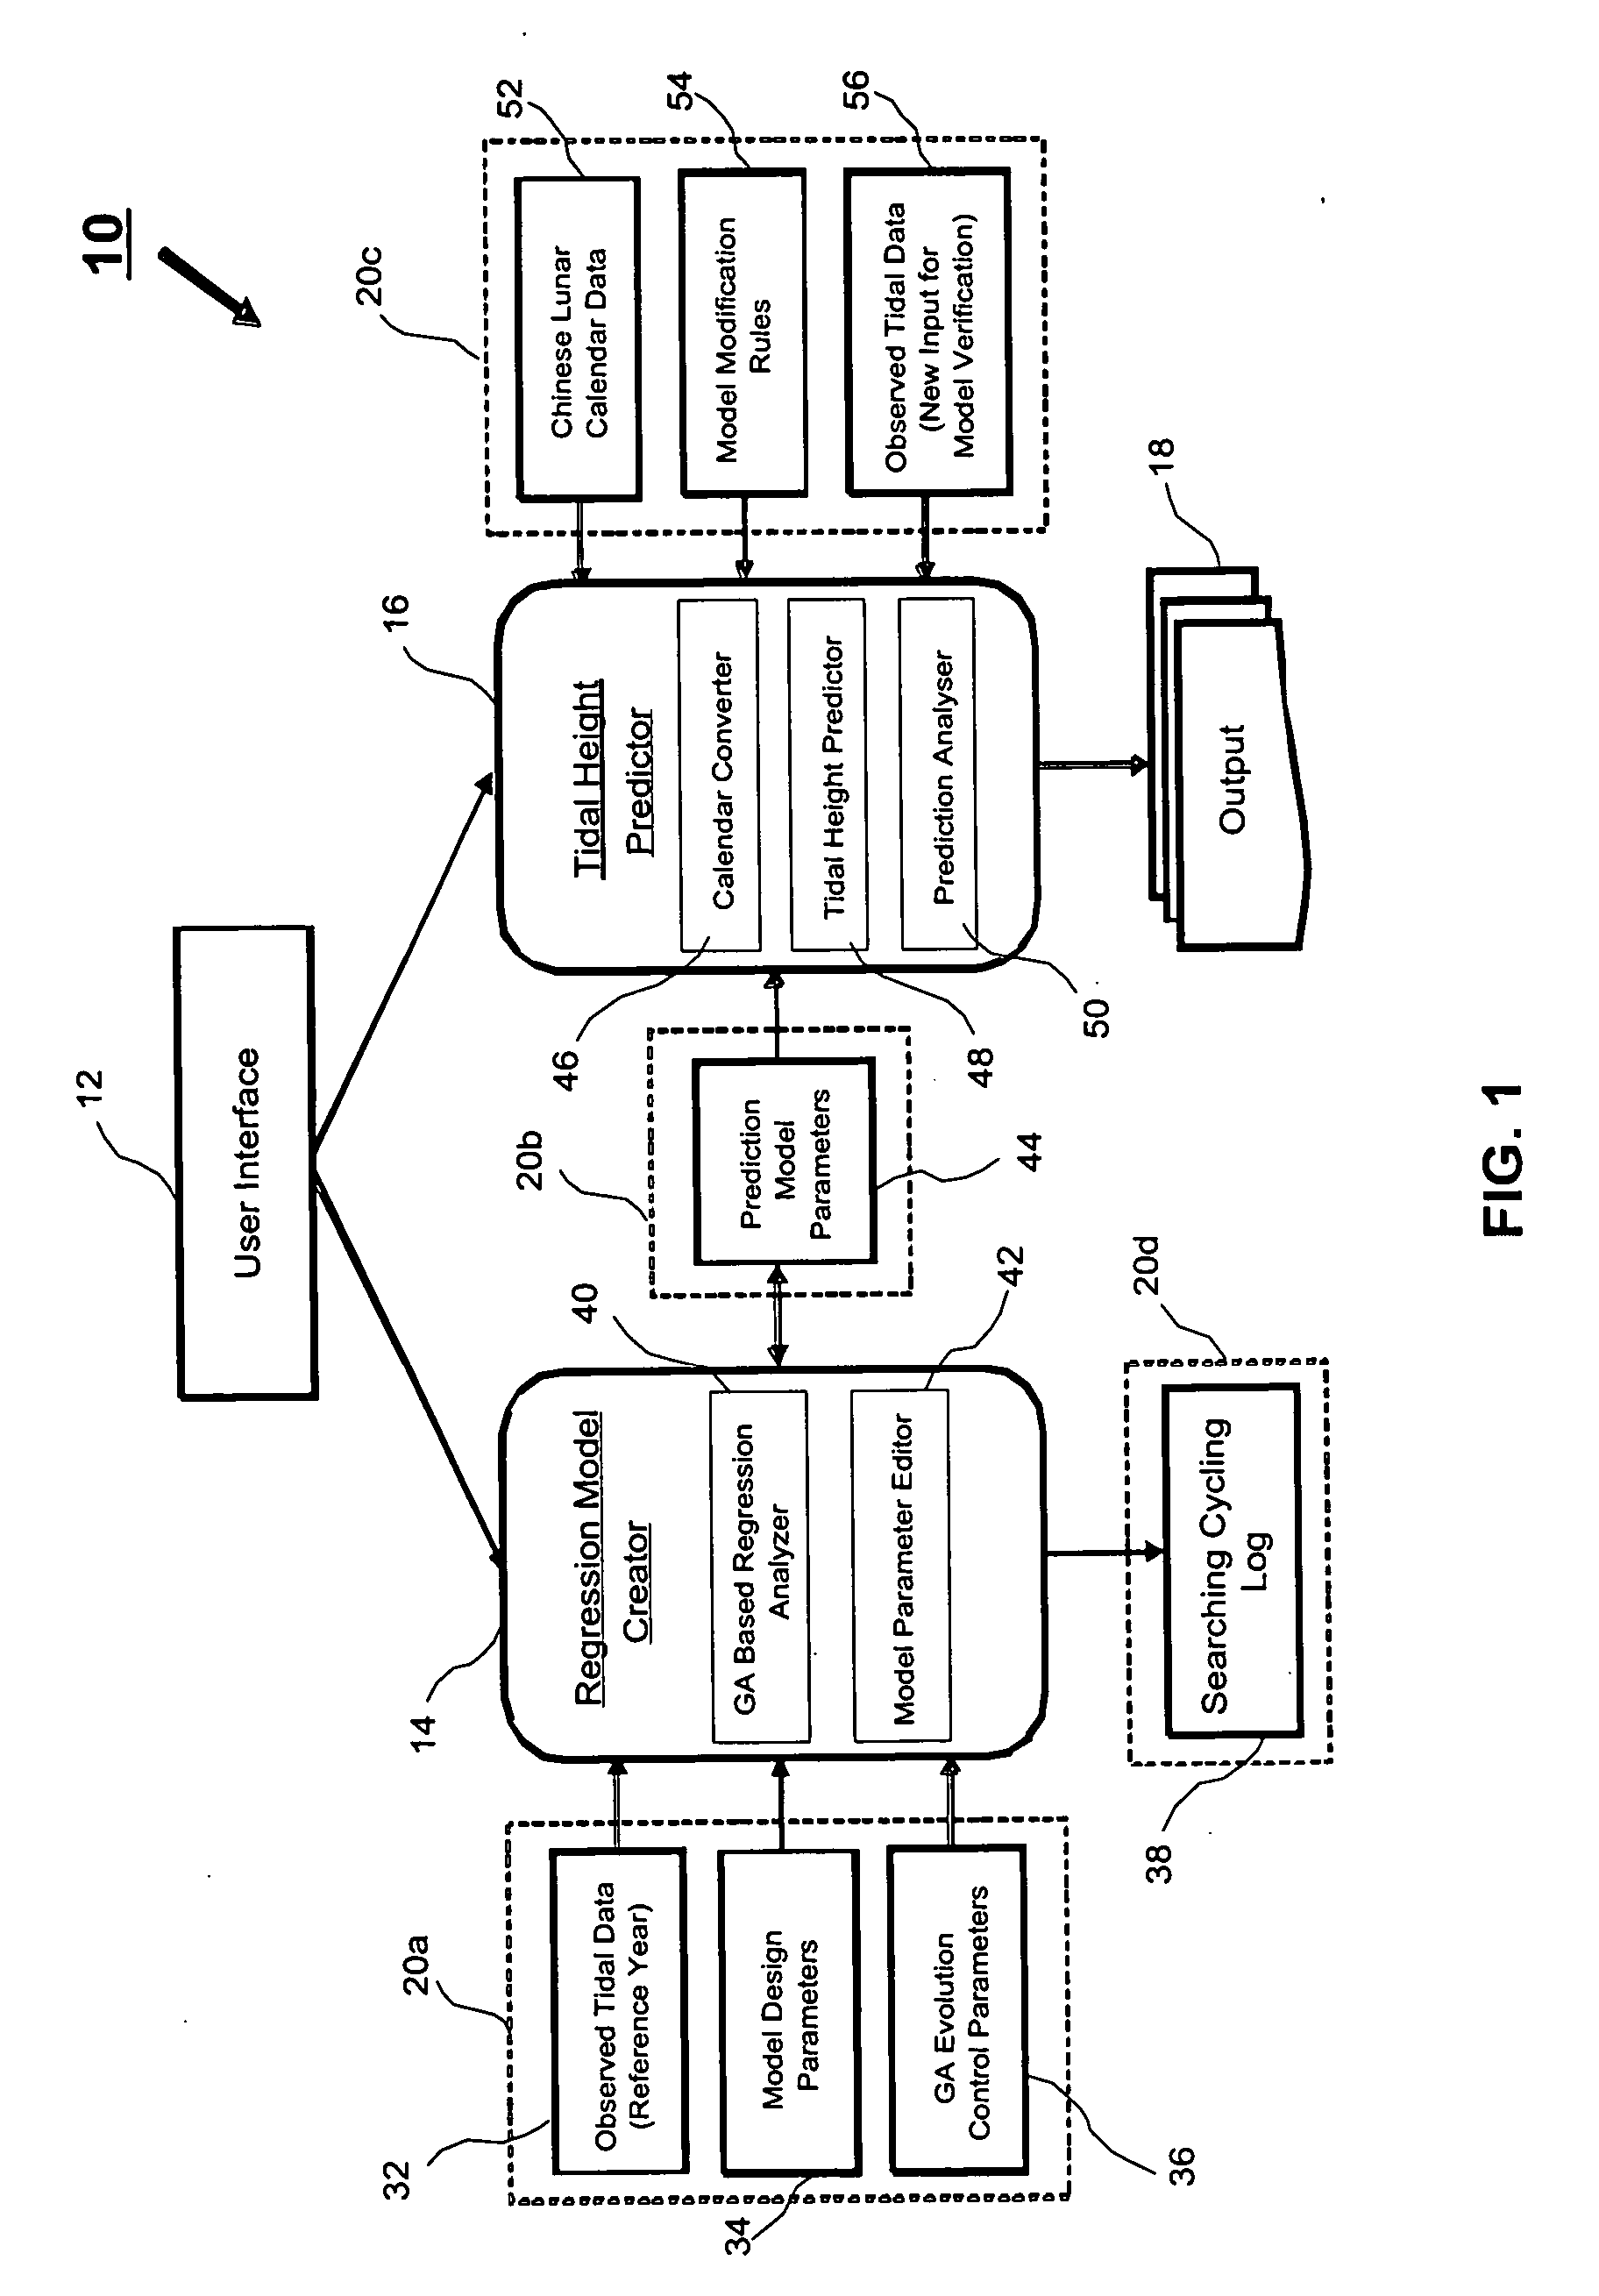 Chinese lunar calendar-based tidal prediction system and method thereof